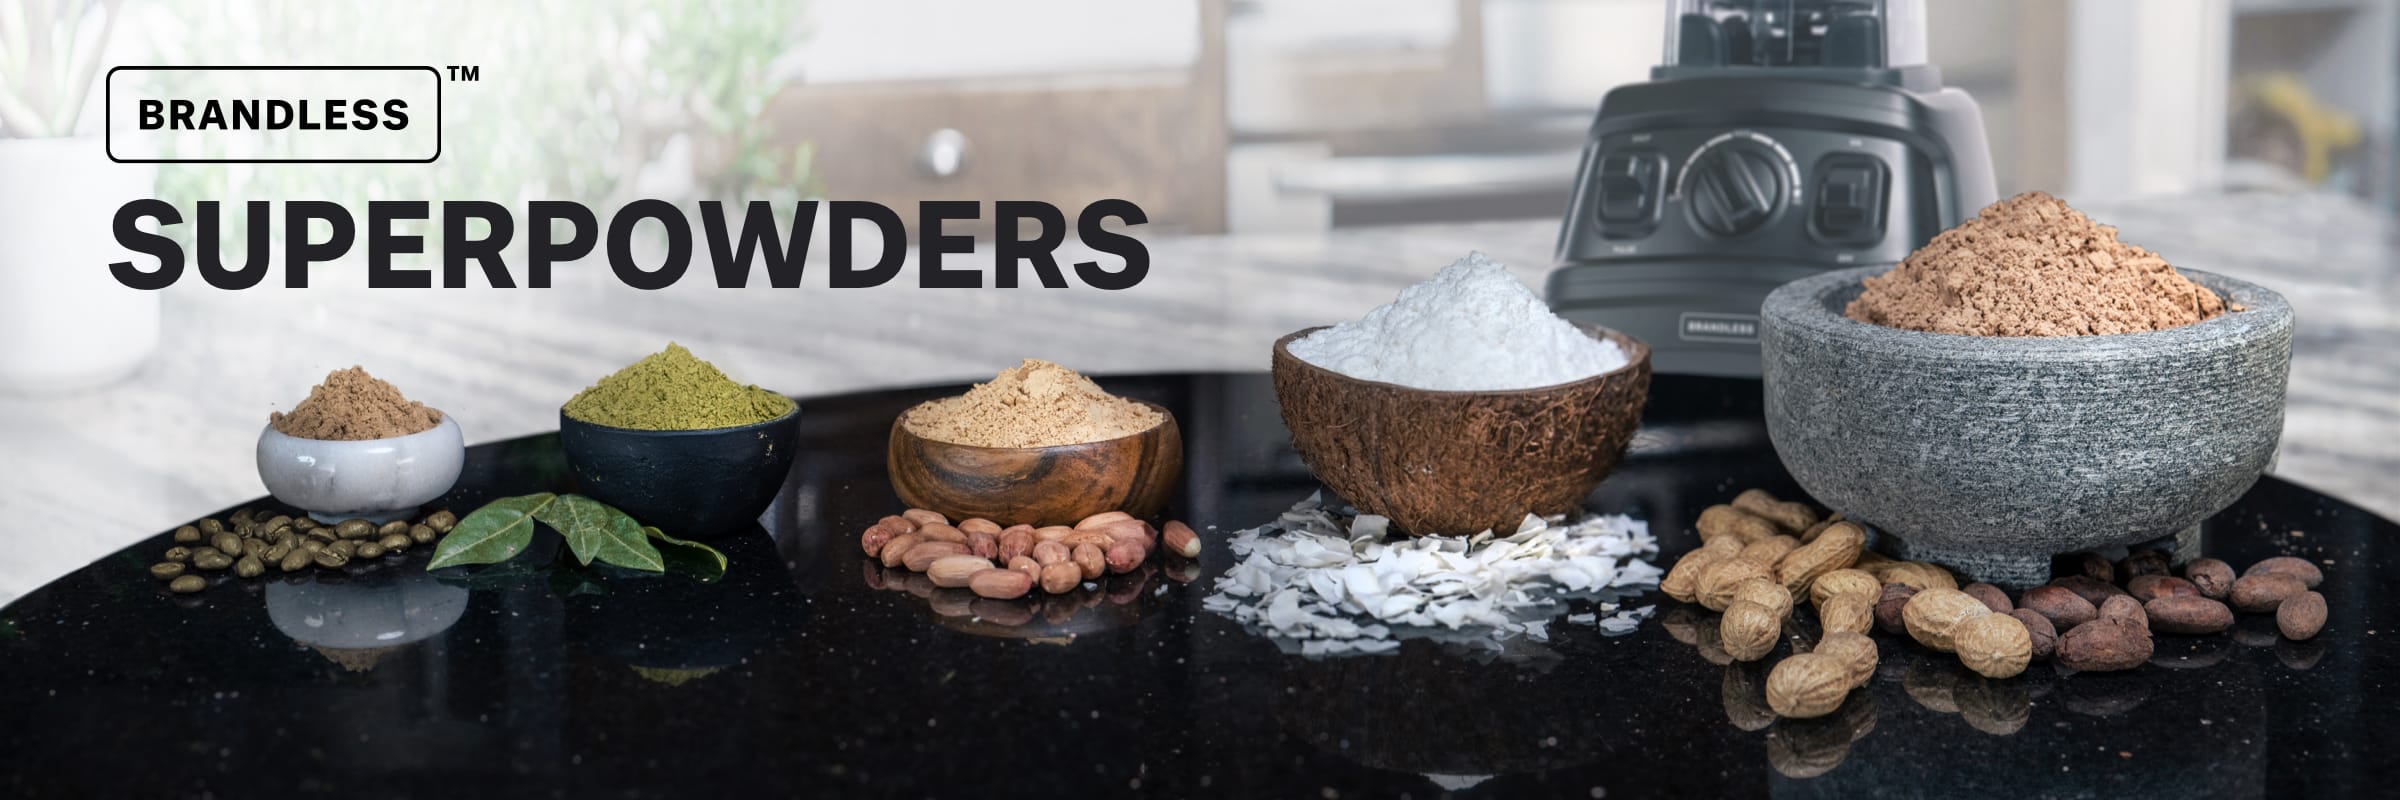 Superpowders.  Image of the five new Brandless powder products in five separate bowls with the peanuts, chocolate pieces, coconut flakes, and coffee beans the powders were derived from.